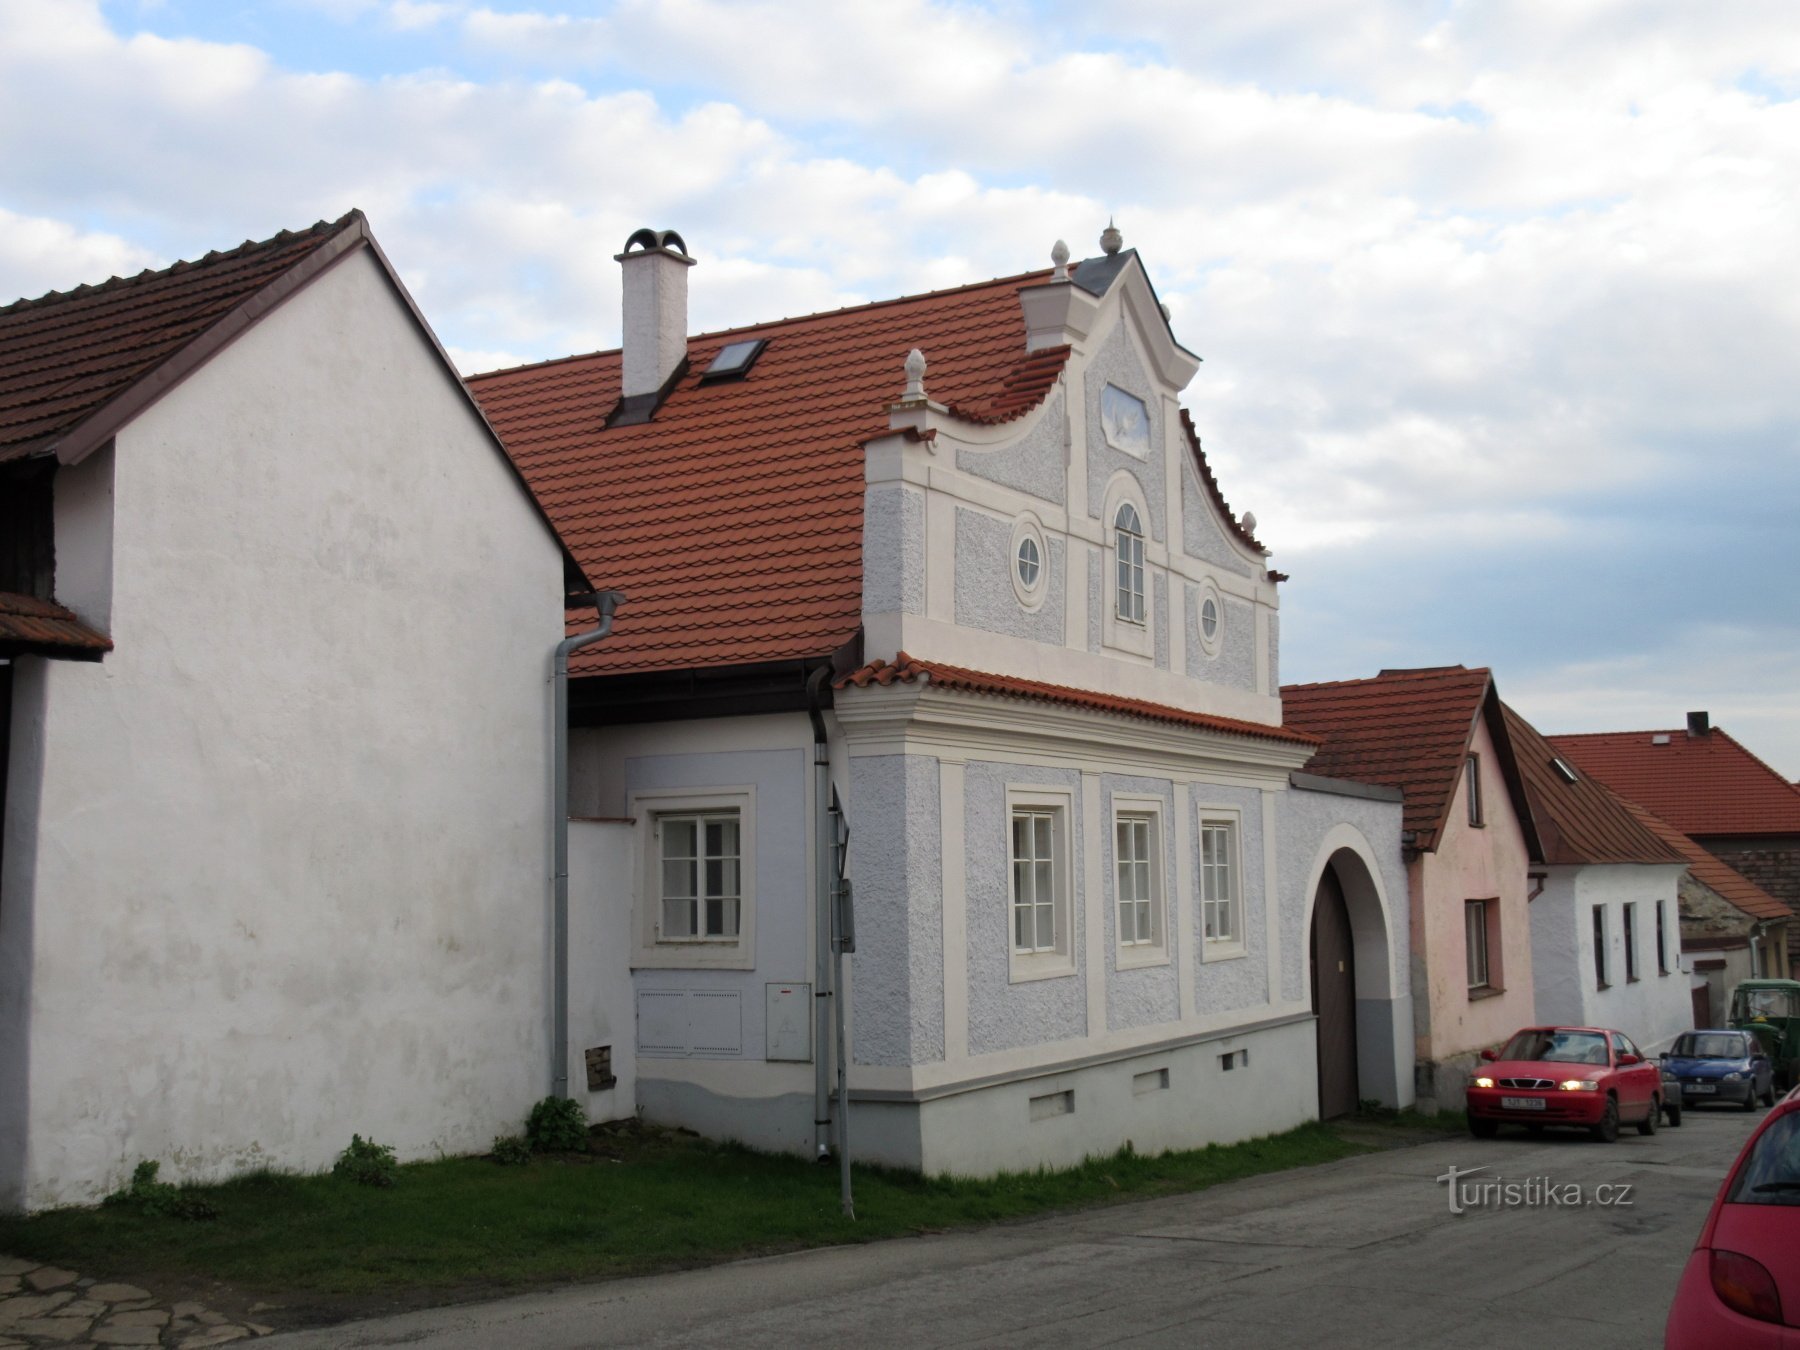 Pacov - history, monuments and brewery